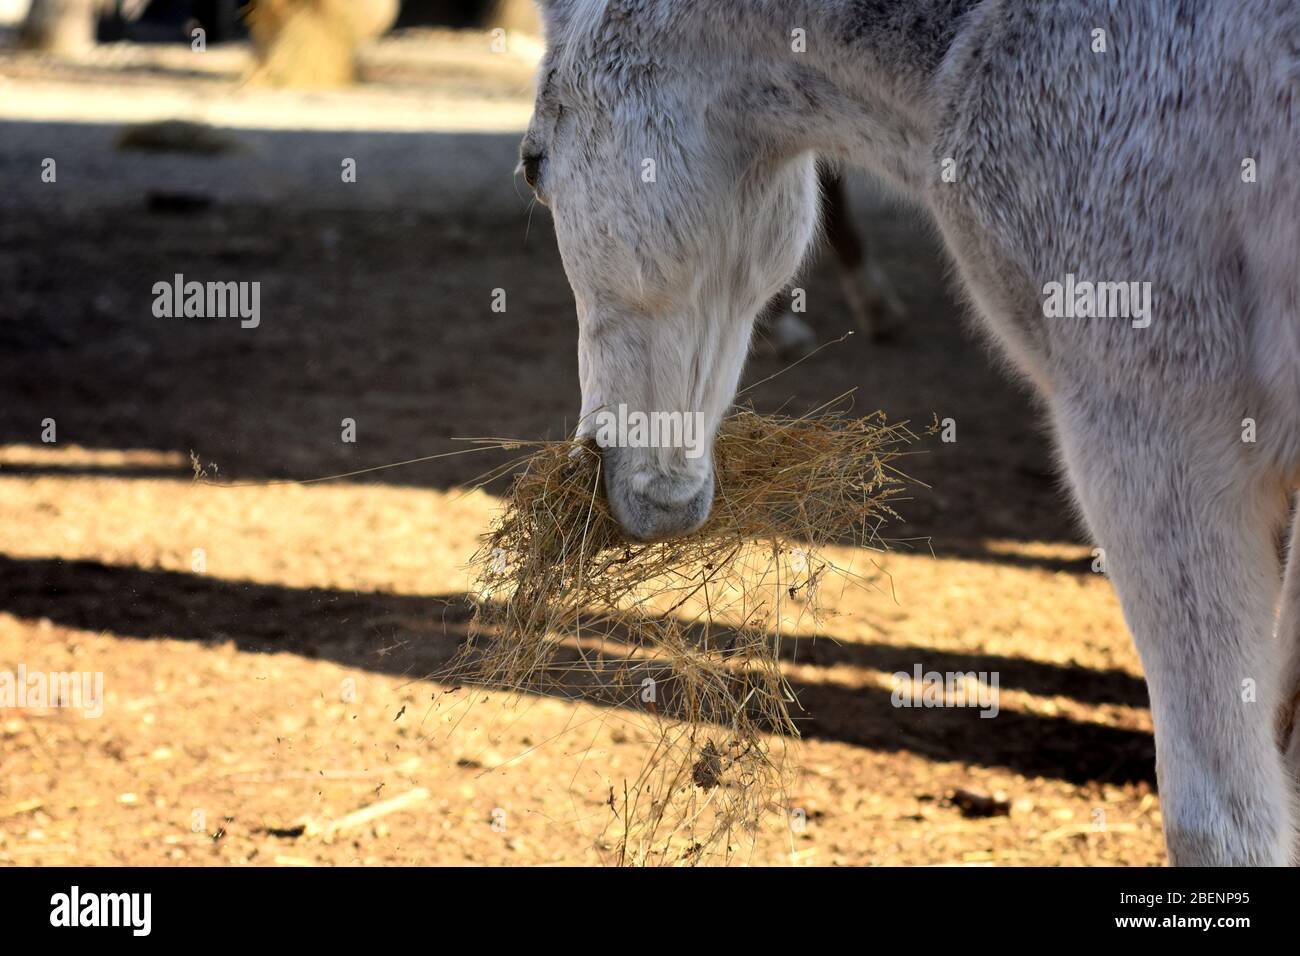 Closeup portrait of beautiful young horse eating hay at the farm/ Animal nature landscape Stock Photo